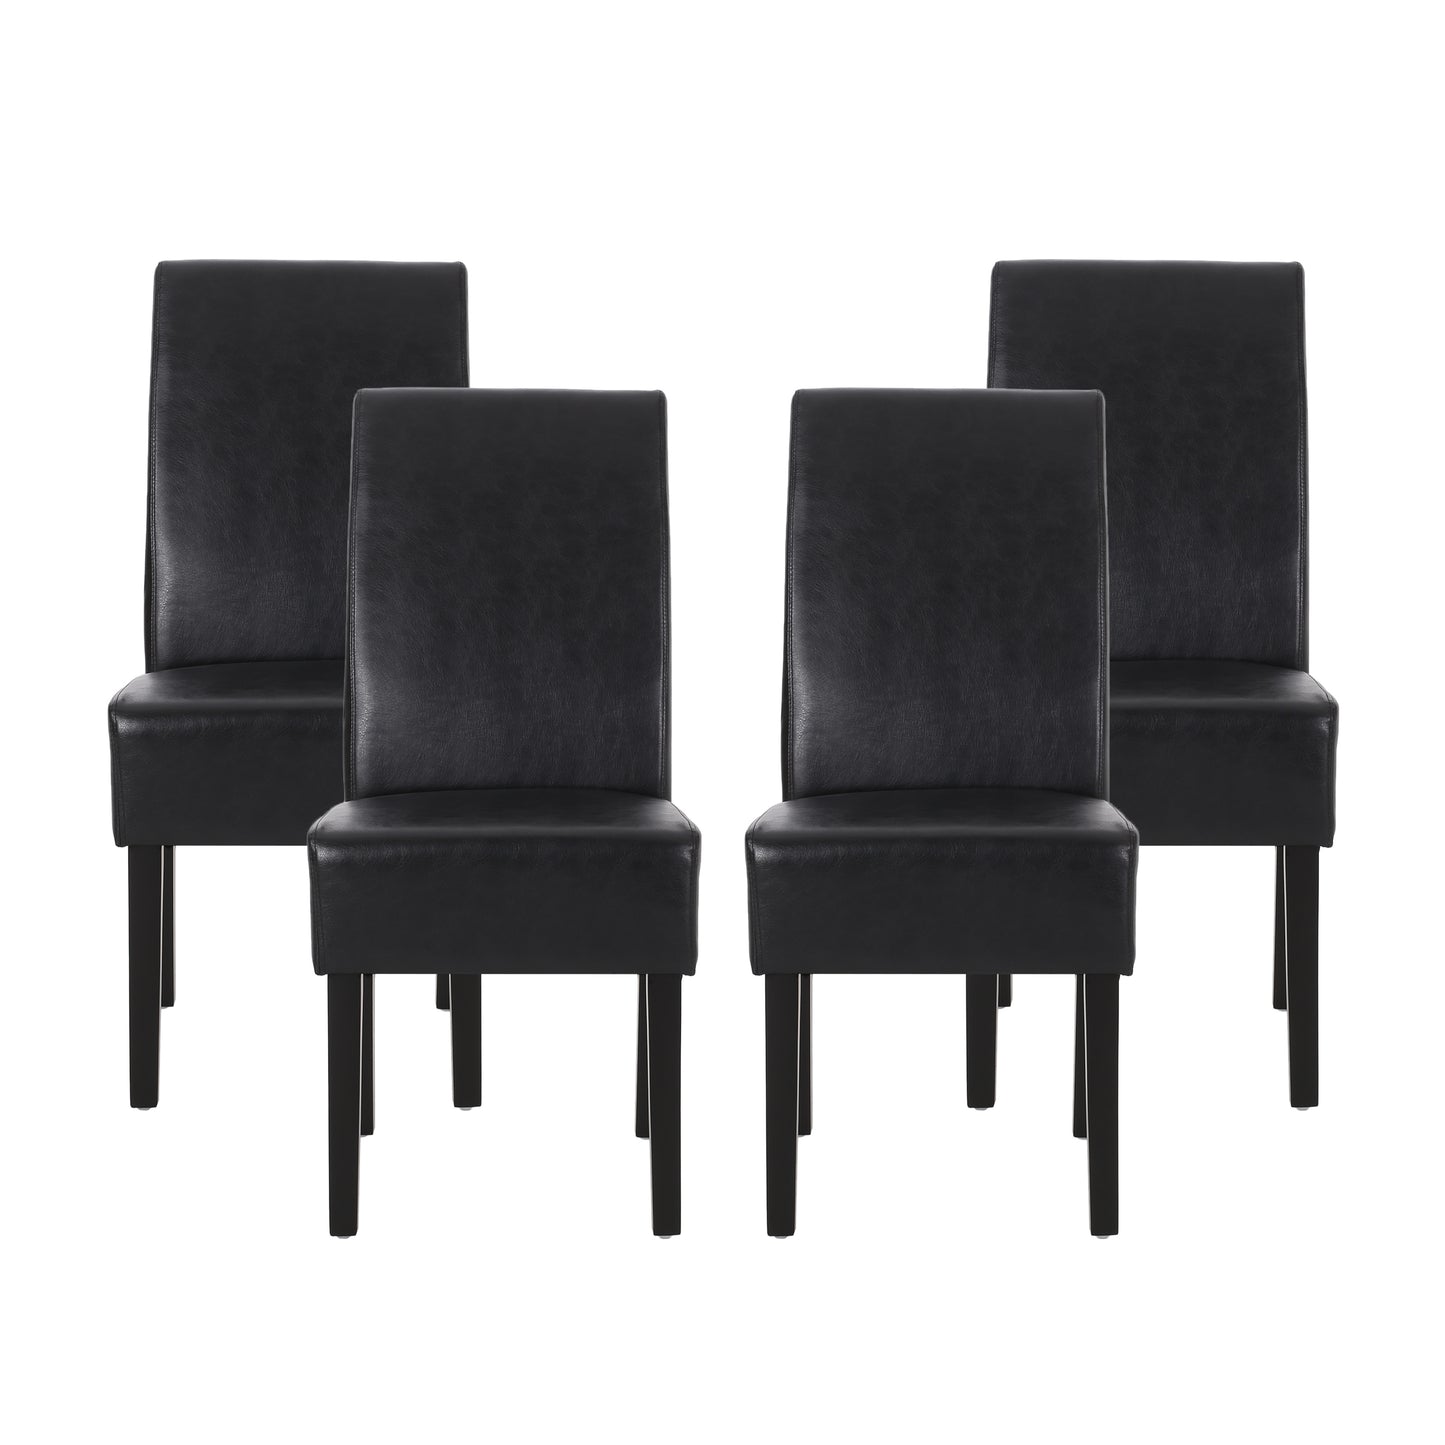 Thurber Contemporary Upholstered Dining Chairs, Set of 4